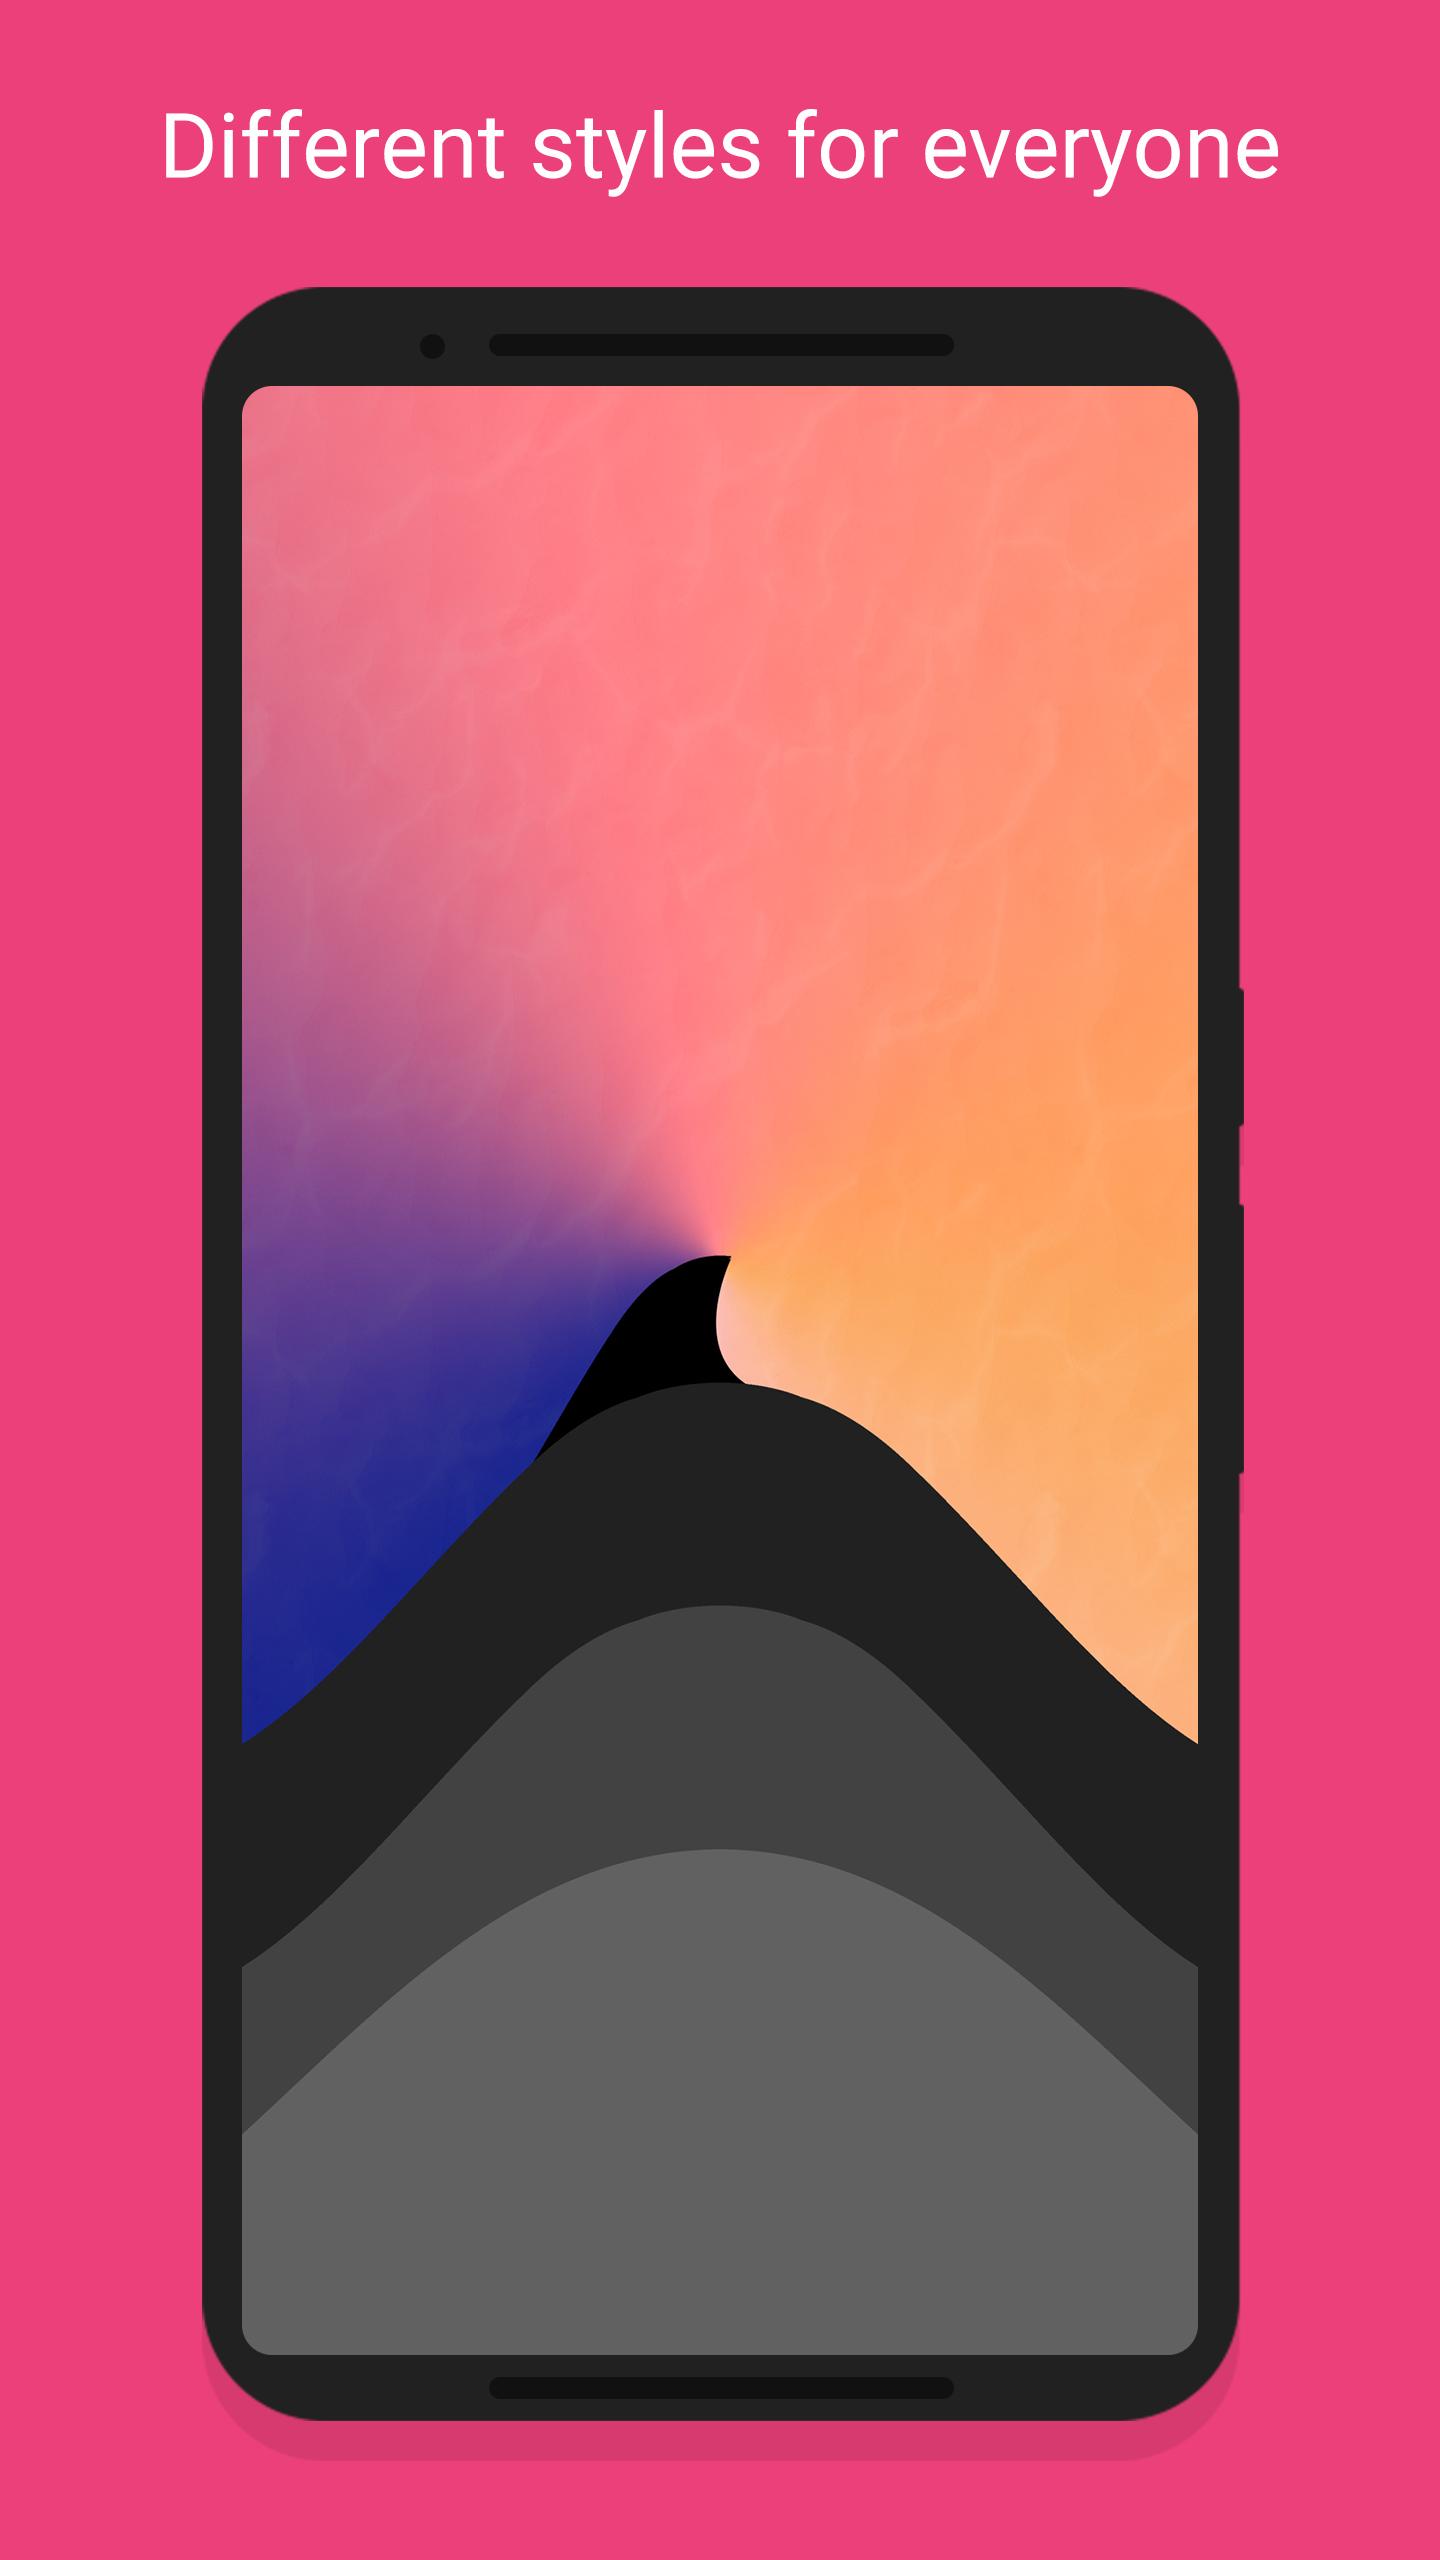 MyWallApp® - Wallpapers